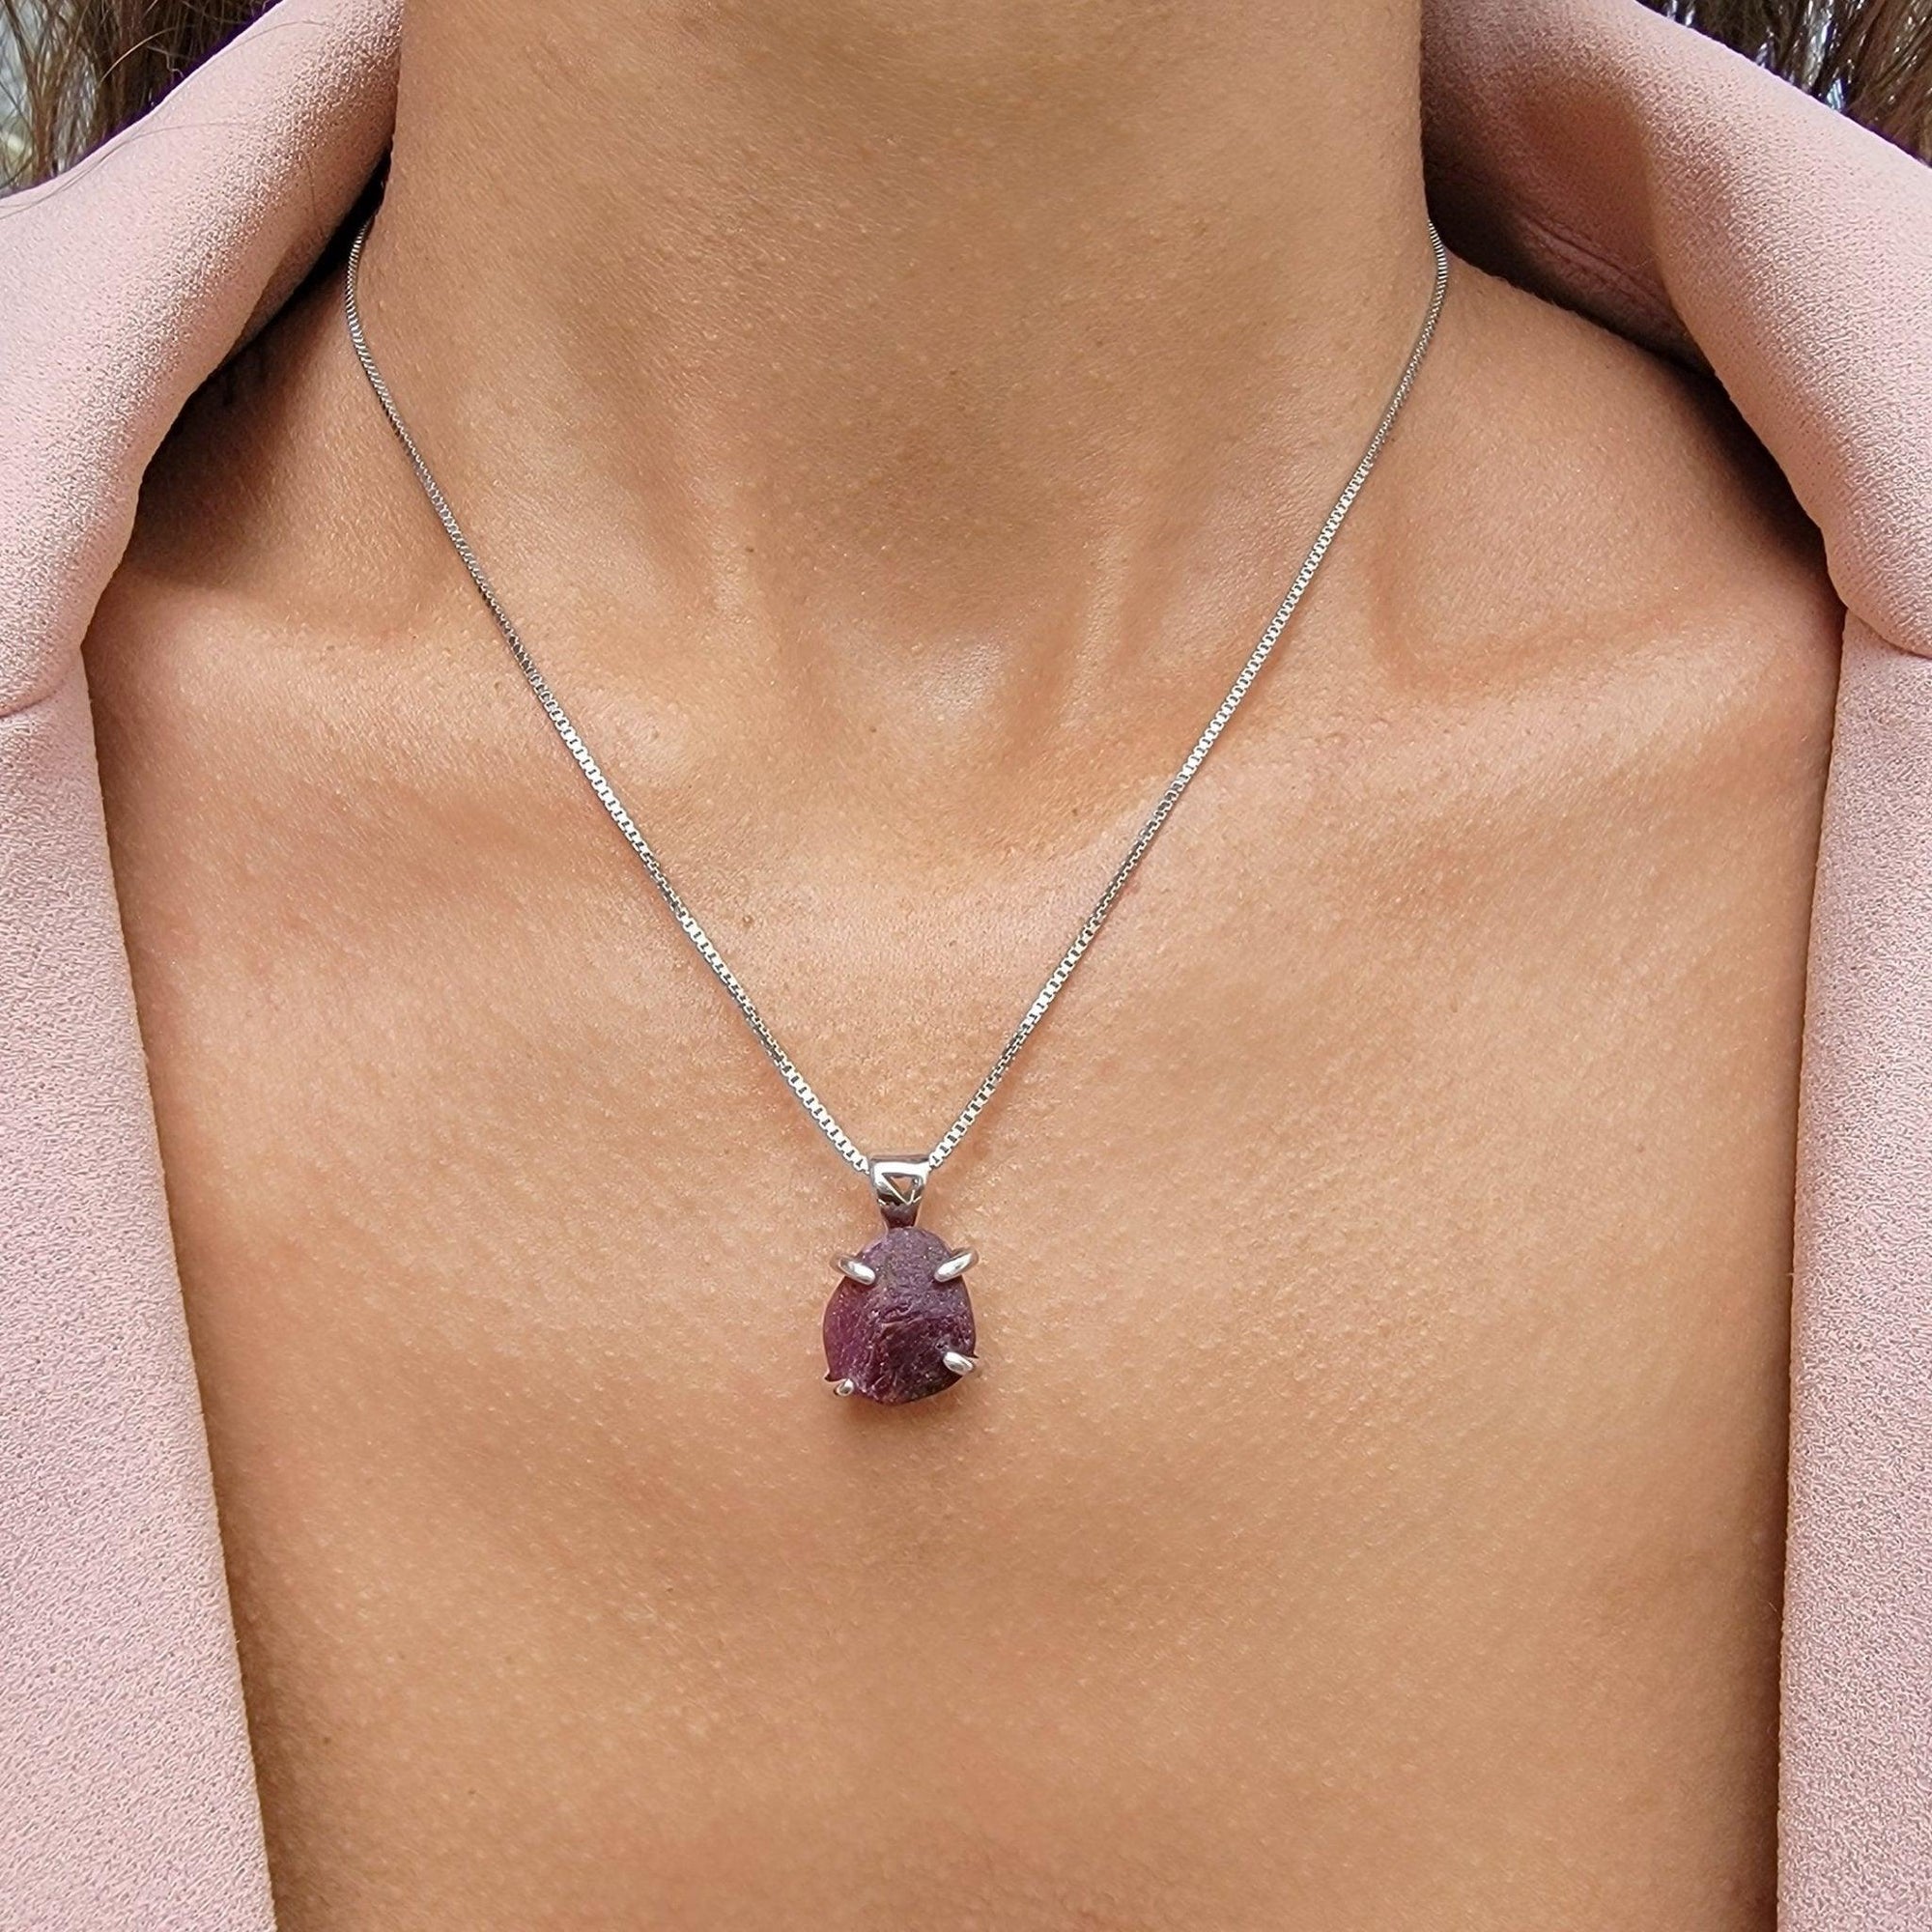 Real Raw Ruby Pendant Necklace - Uniquelan Jewelry